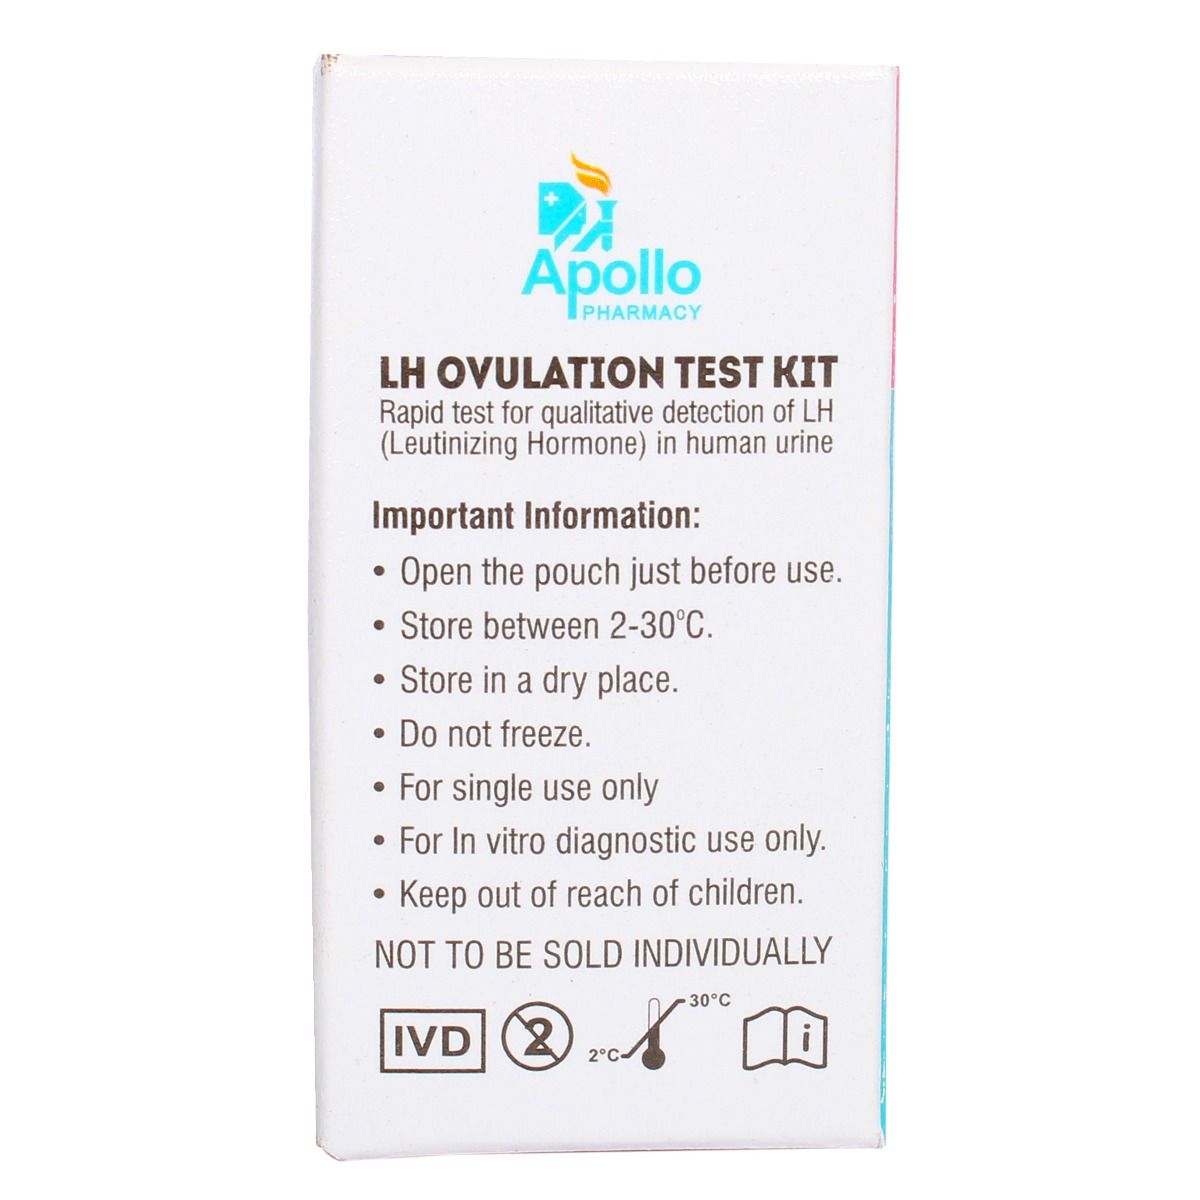 Apollo Pharmacy LH Ovulation 5 Day Test Kit, 1 Kit, Pack of 1 